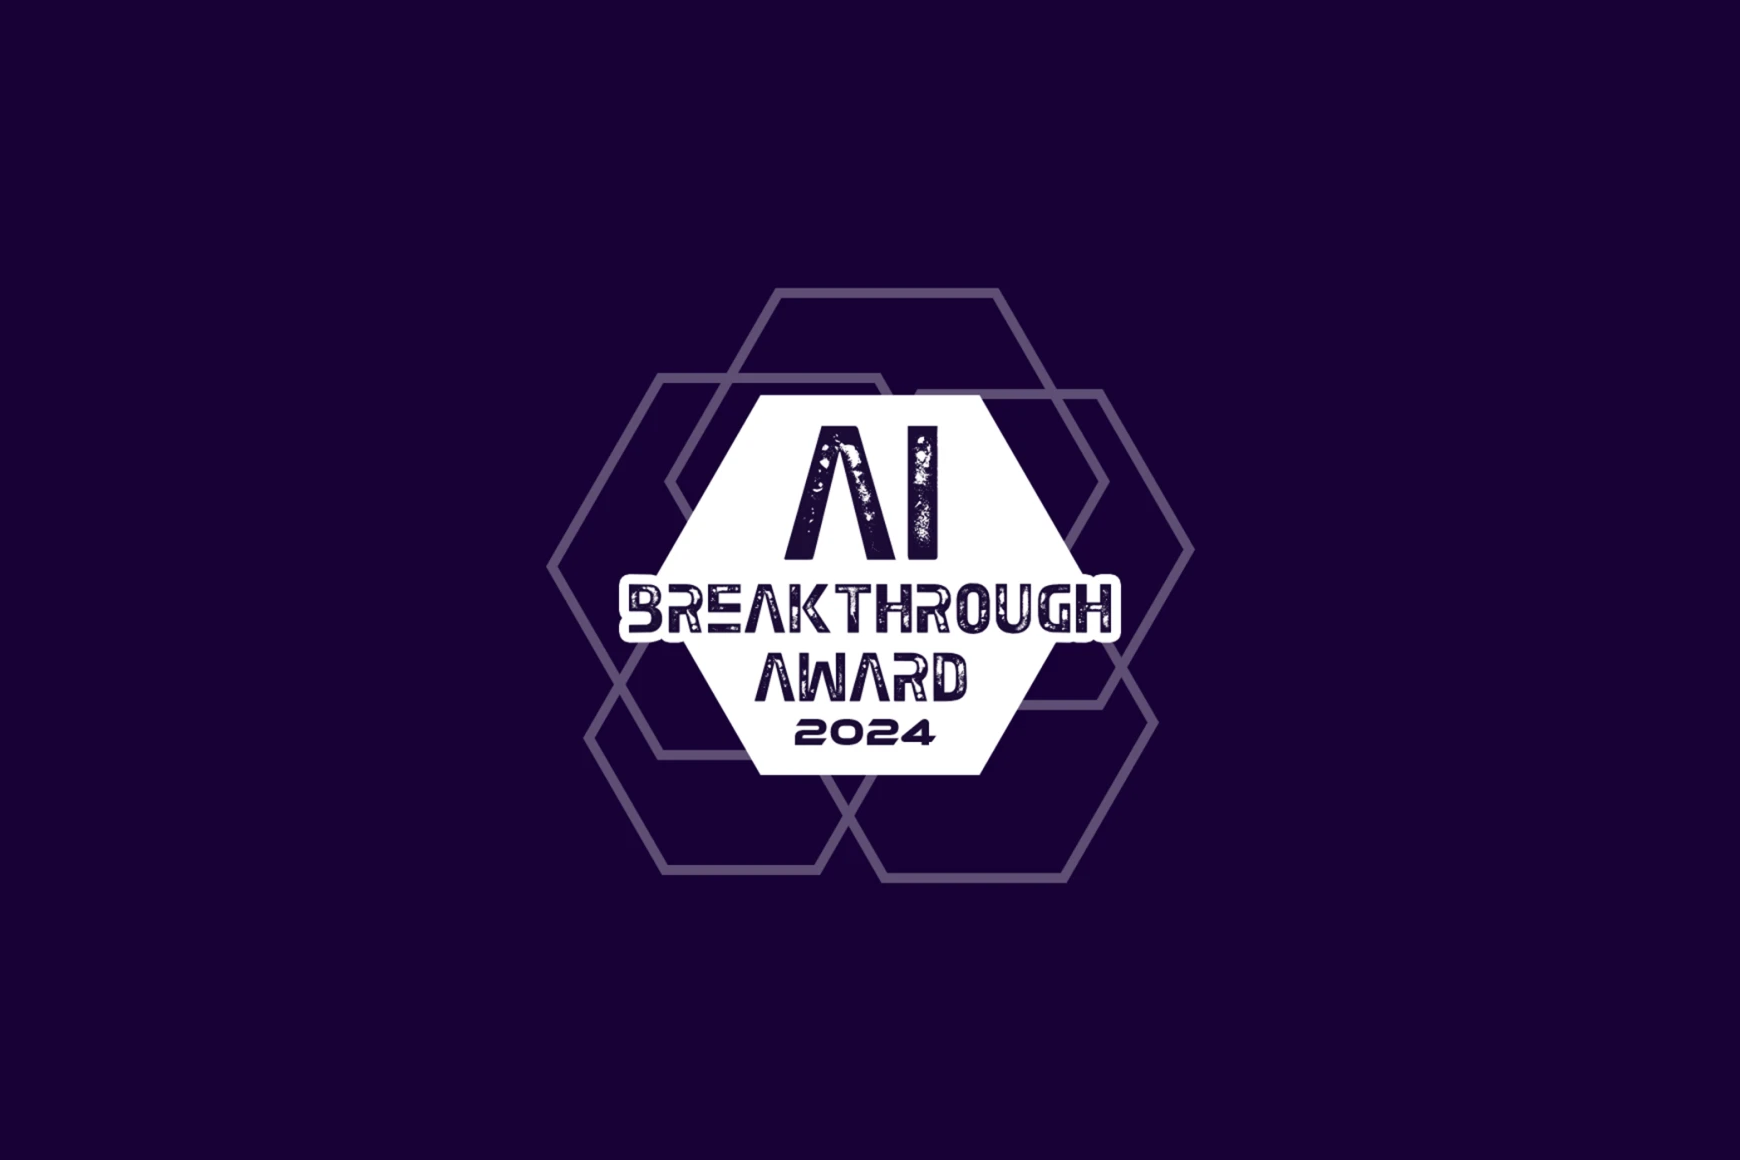 Talkdesk CEO Tiago Paiva named Best Artificial Intelligence Company CEO in 2024 AI Breakthrough Awards Program